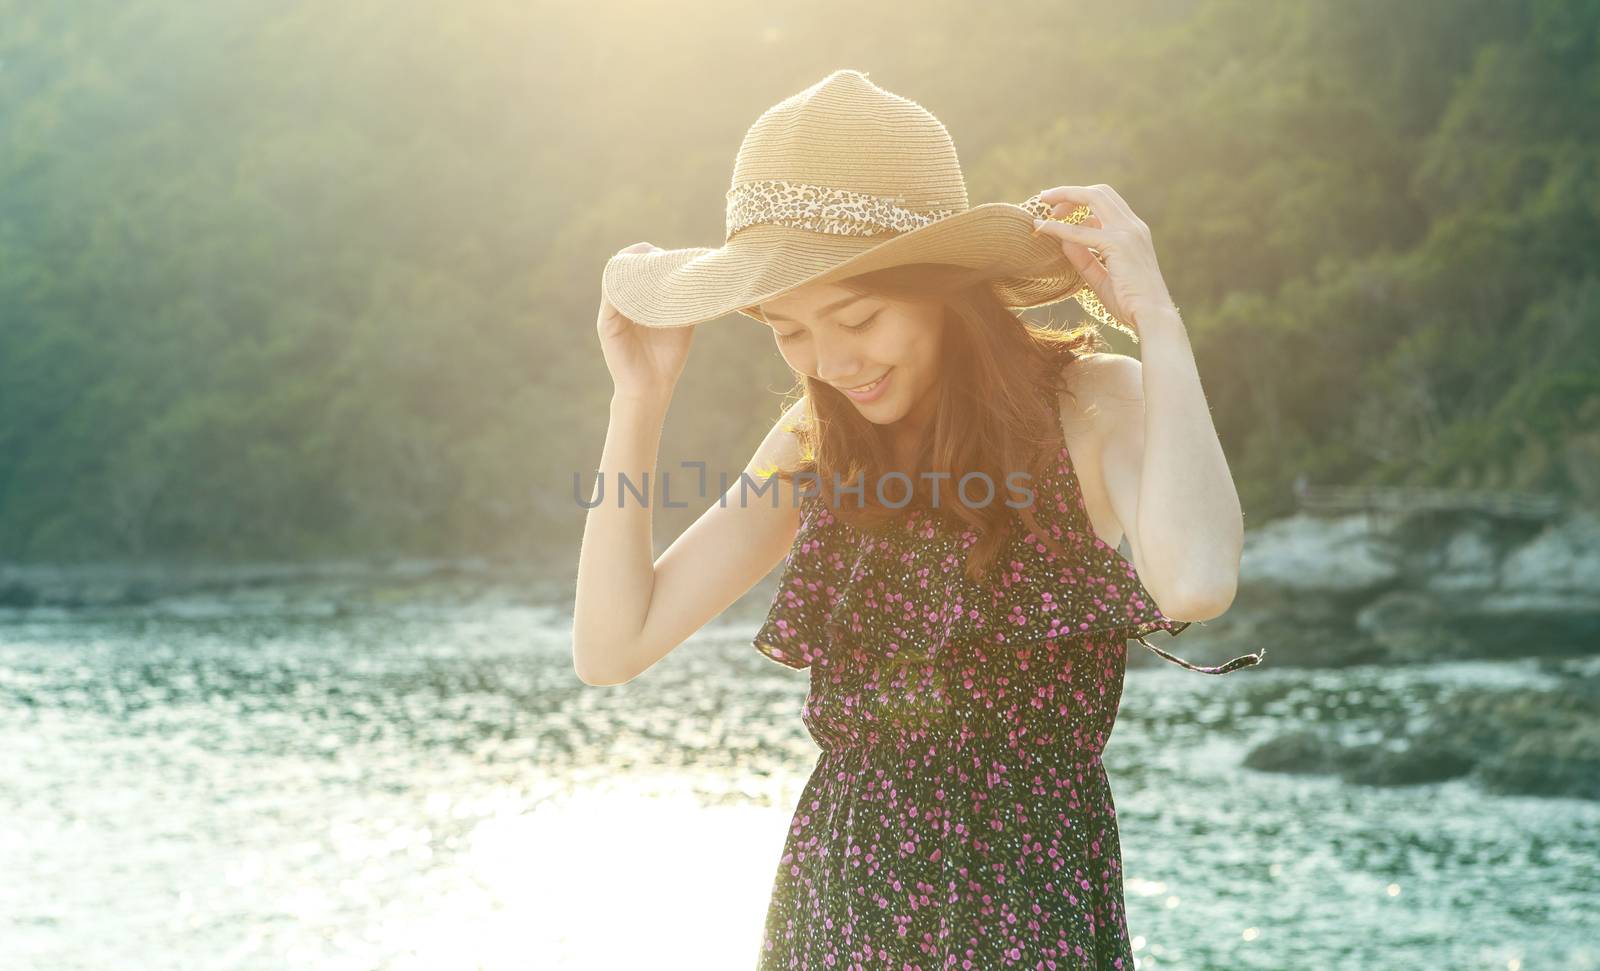 portrait of young beautiful woman wearing long dress and wide straw hat smiling at sea side location  use for modern life fashion and people activities on vacation